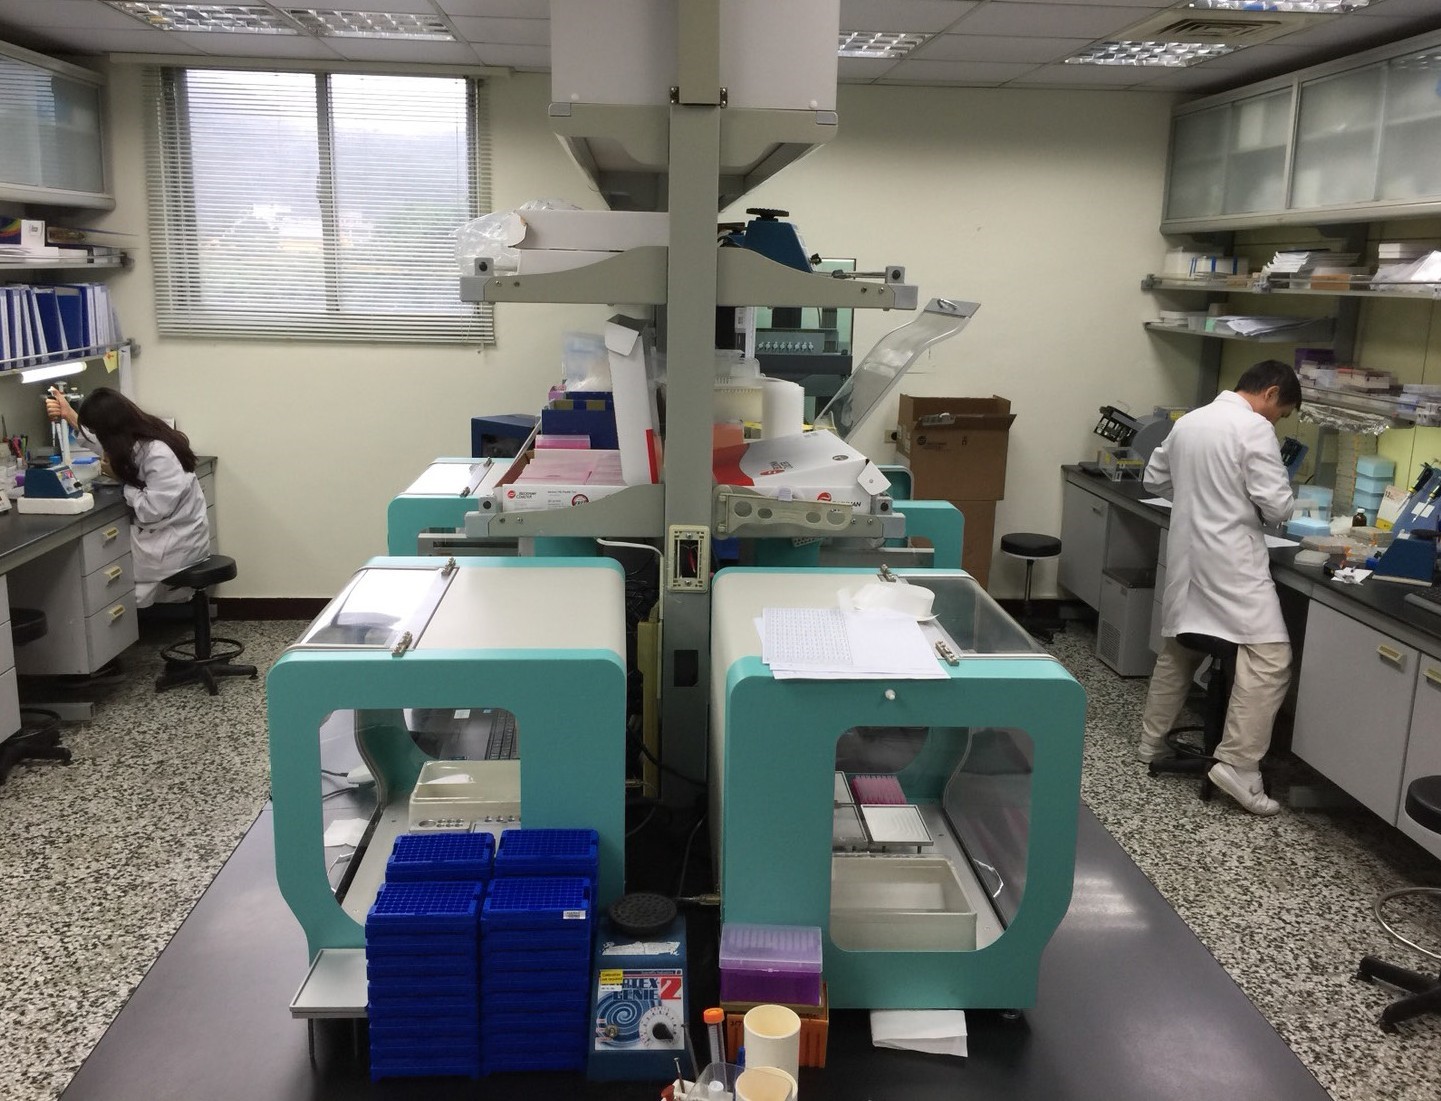 Figure 1. A total of 4 units of EzMate 401 in the lab of Panlabs Biologics.